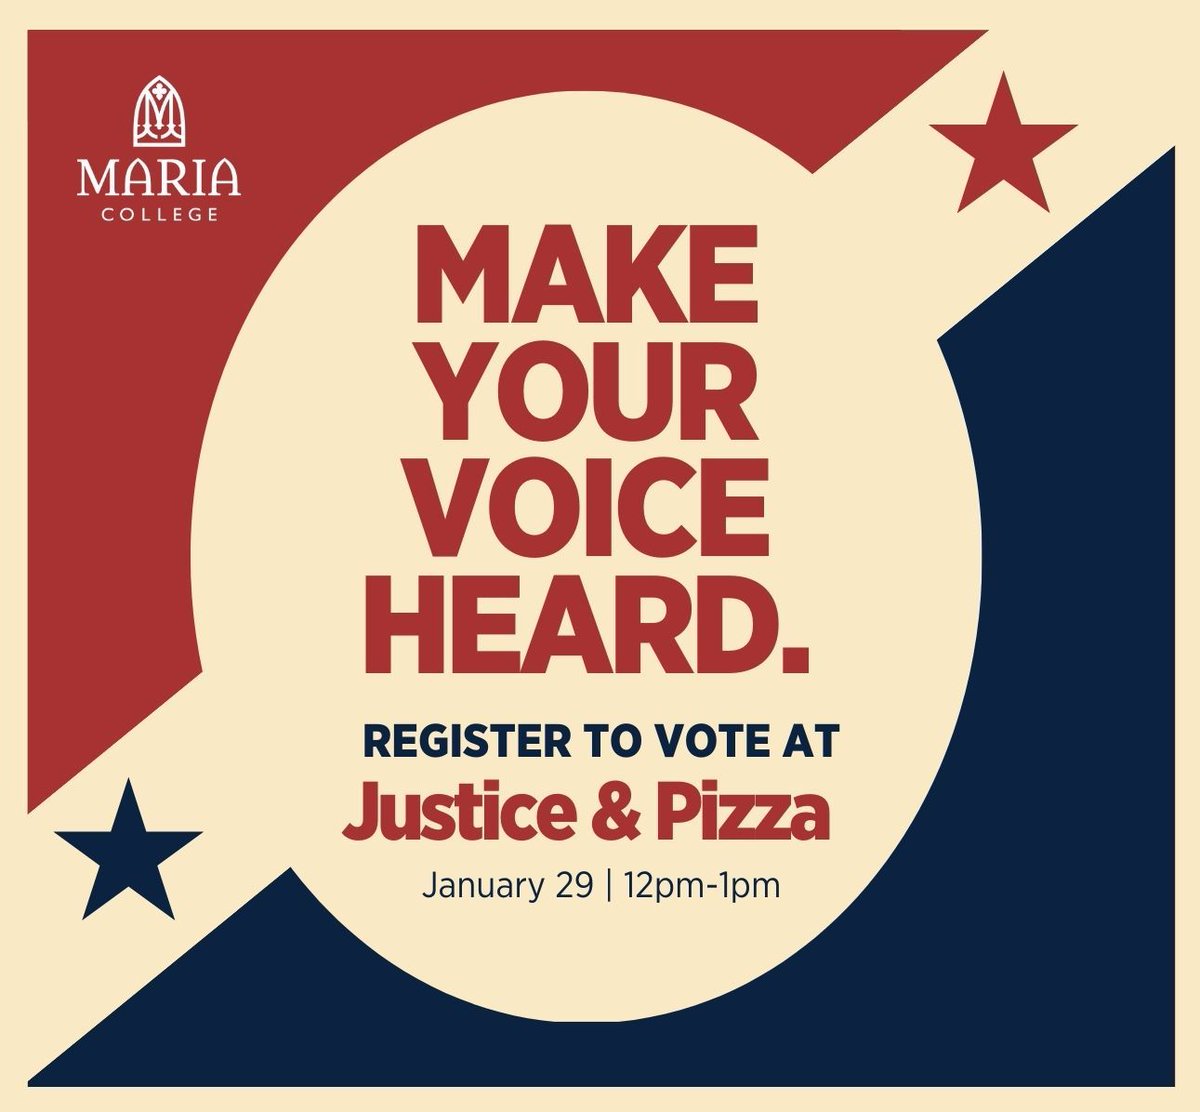 TOMORROW! Join us on campus for Justice & Pizza 1/29 @ noon in Marian Hall, Fitzgerald Court. Come get some free pizza and learn about the League of Women Voters in Albany County. You can register to voteand get info on helping others register to vote. Everyone is welcome!